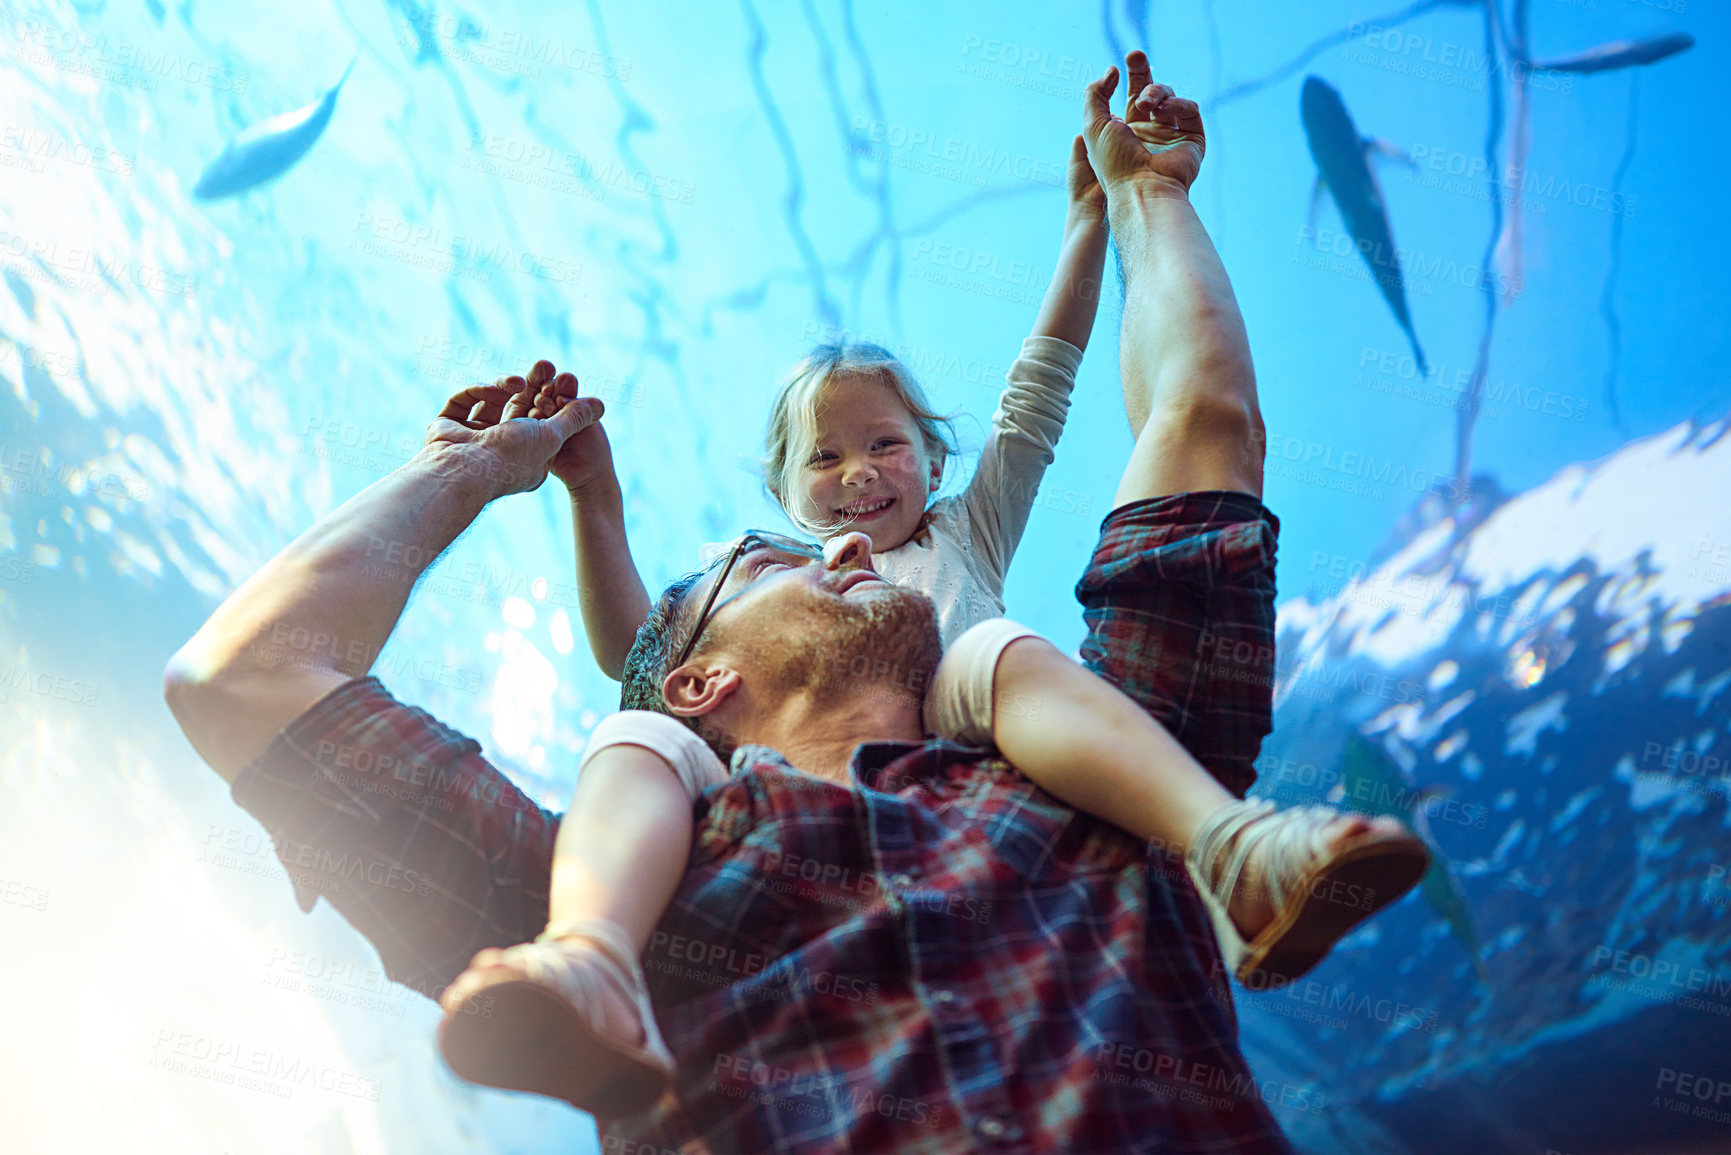 Buy stock photo Cropped shot of a father and his little daughter looking at an exhibit in an aquarium